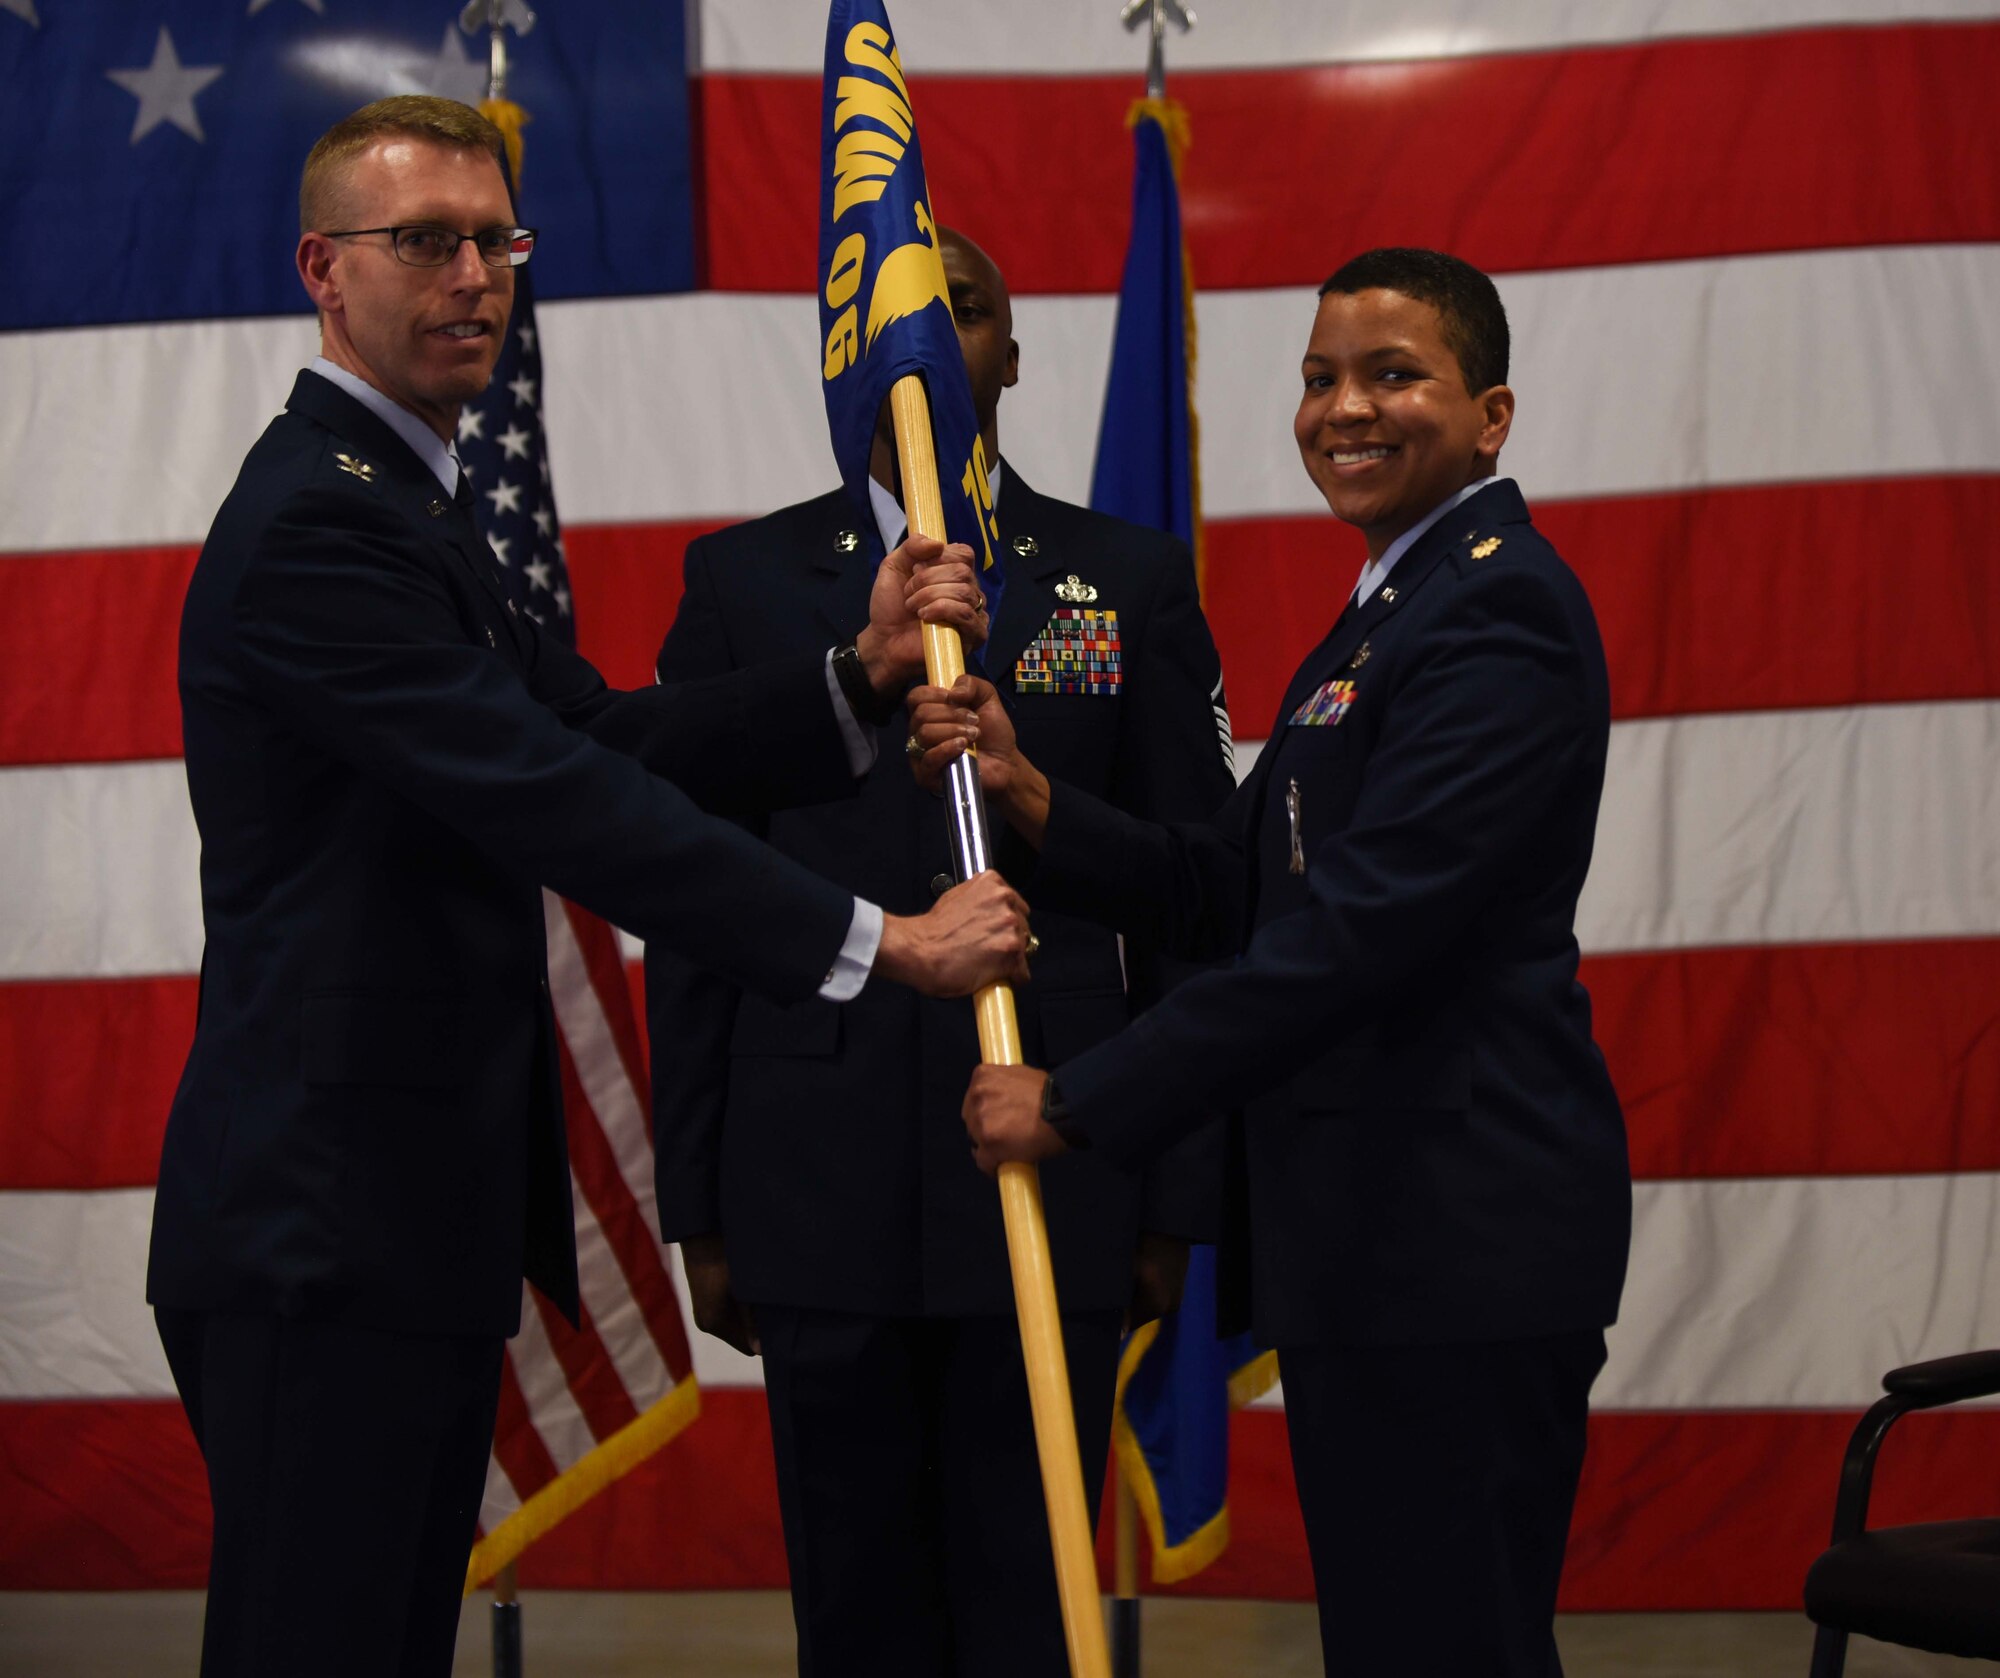 Col. Greg Buckner, 90th Maintenance Group commander, passes the guidon to Maj. Christine Hernandez, 790th Maintenance Squadron commander, during the 790th MXS change of command ceremony at F.E. Warren Air Force Base, Wyo., June 14, 2018. The ceremony signified the transition of command from Lt. Col. Grant Fowler. (U.S. Air Force photo by Airman 1st Class Abbigayle Wagner)